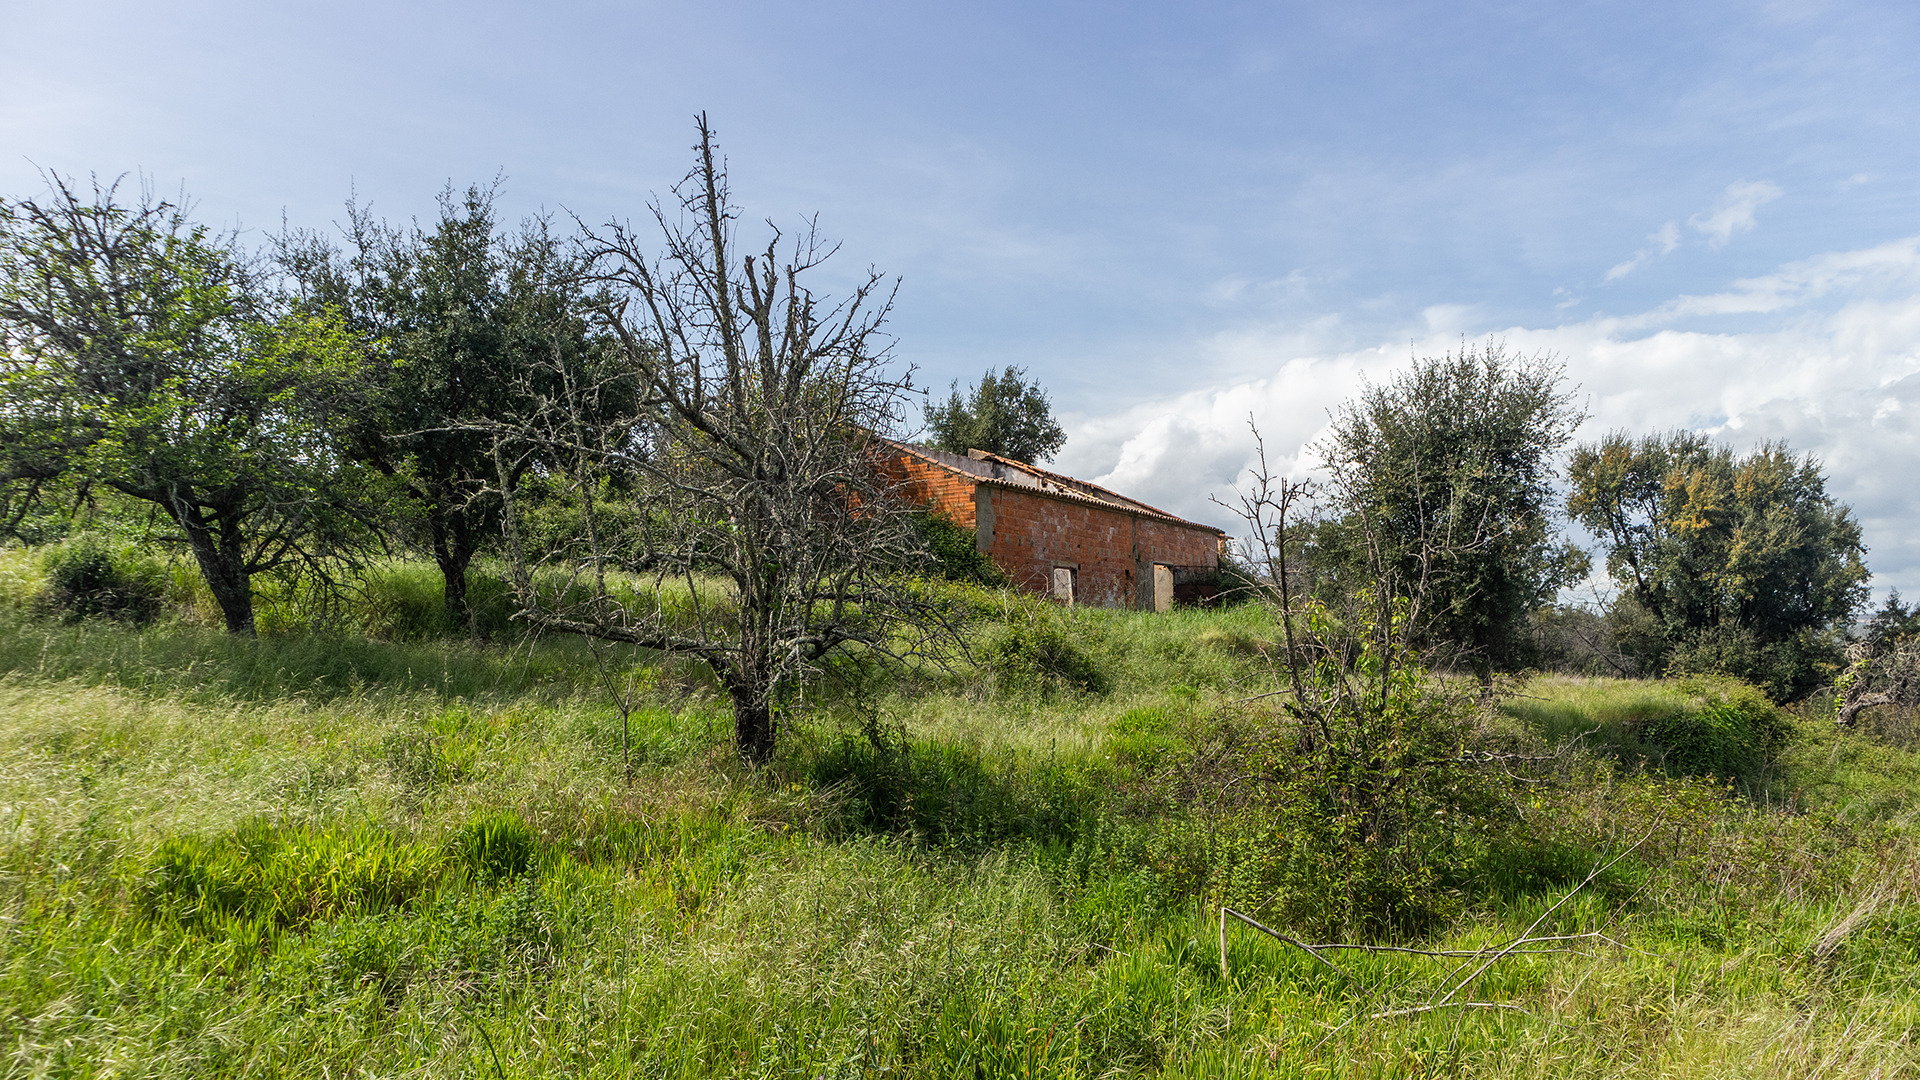 Fabulous country plot with cork trees and two ruins to restore near Monchique | LG1775 This lovely well-located piece of land gives possibilities for rural tourism, guest accommodation or permanent living in scenic surroundings close to the town and with easy access.